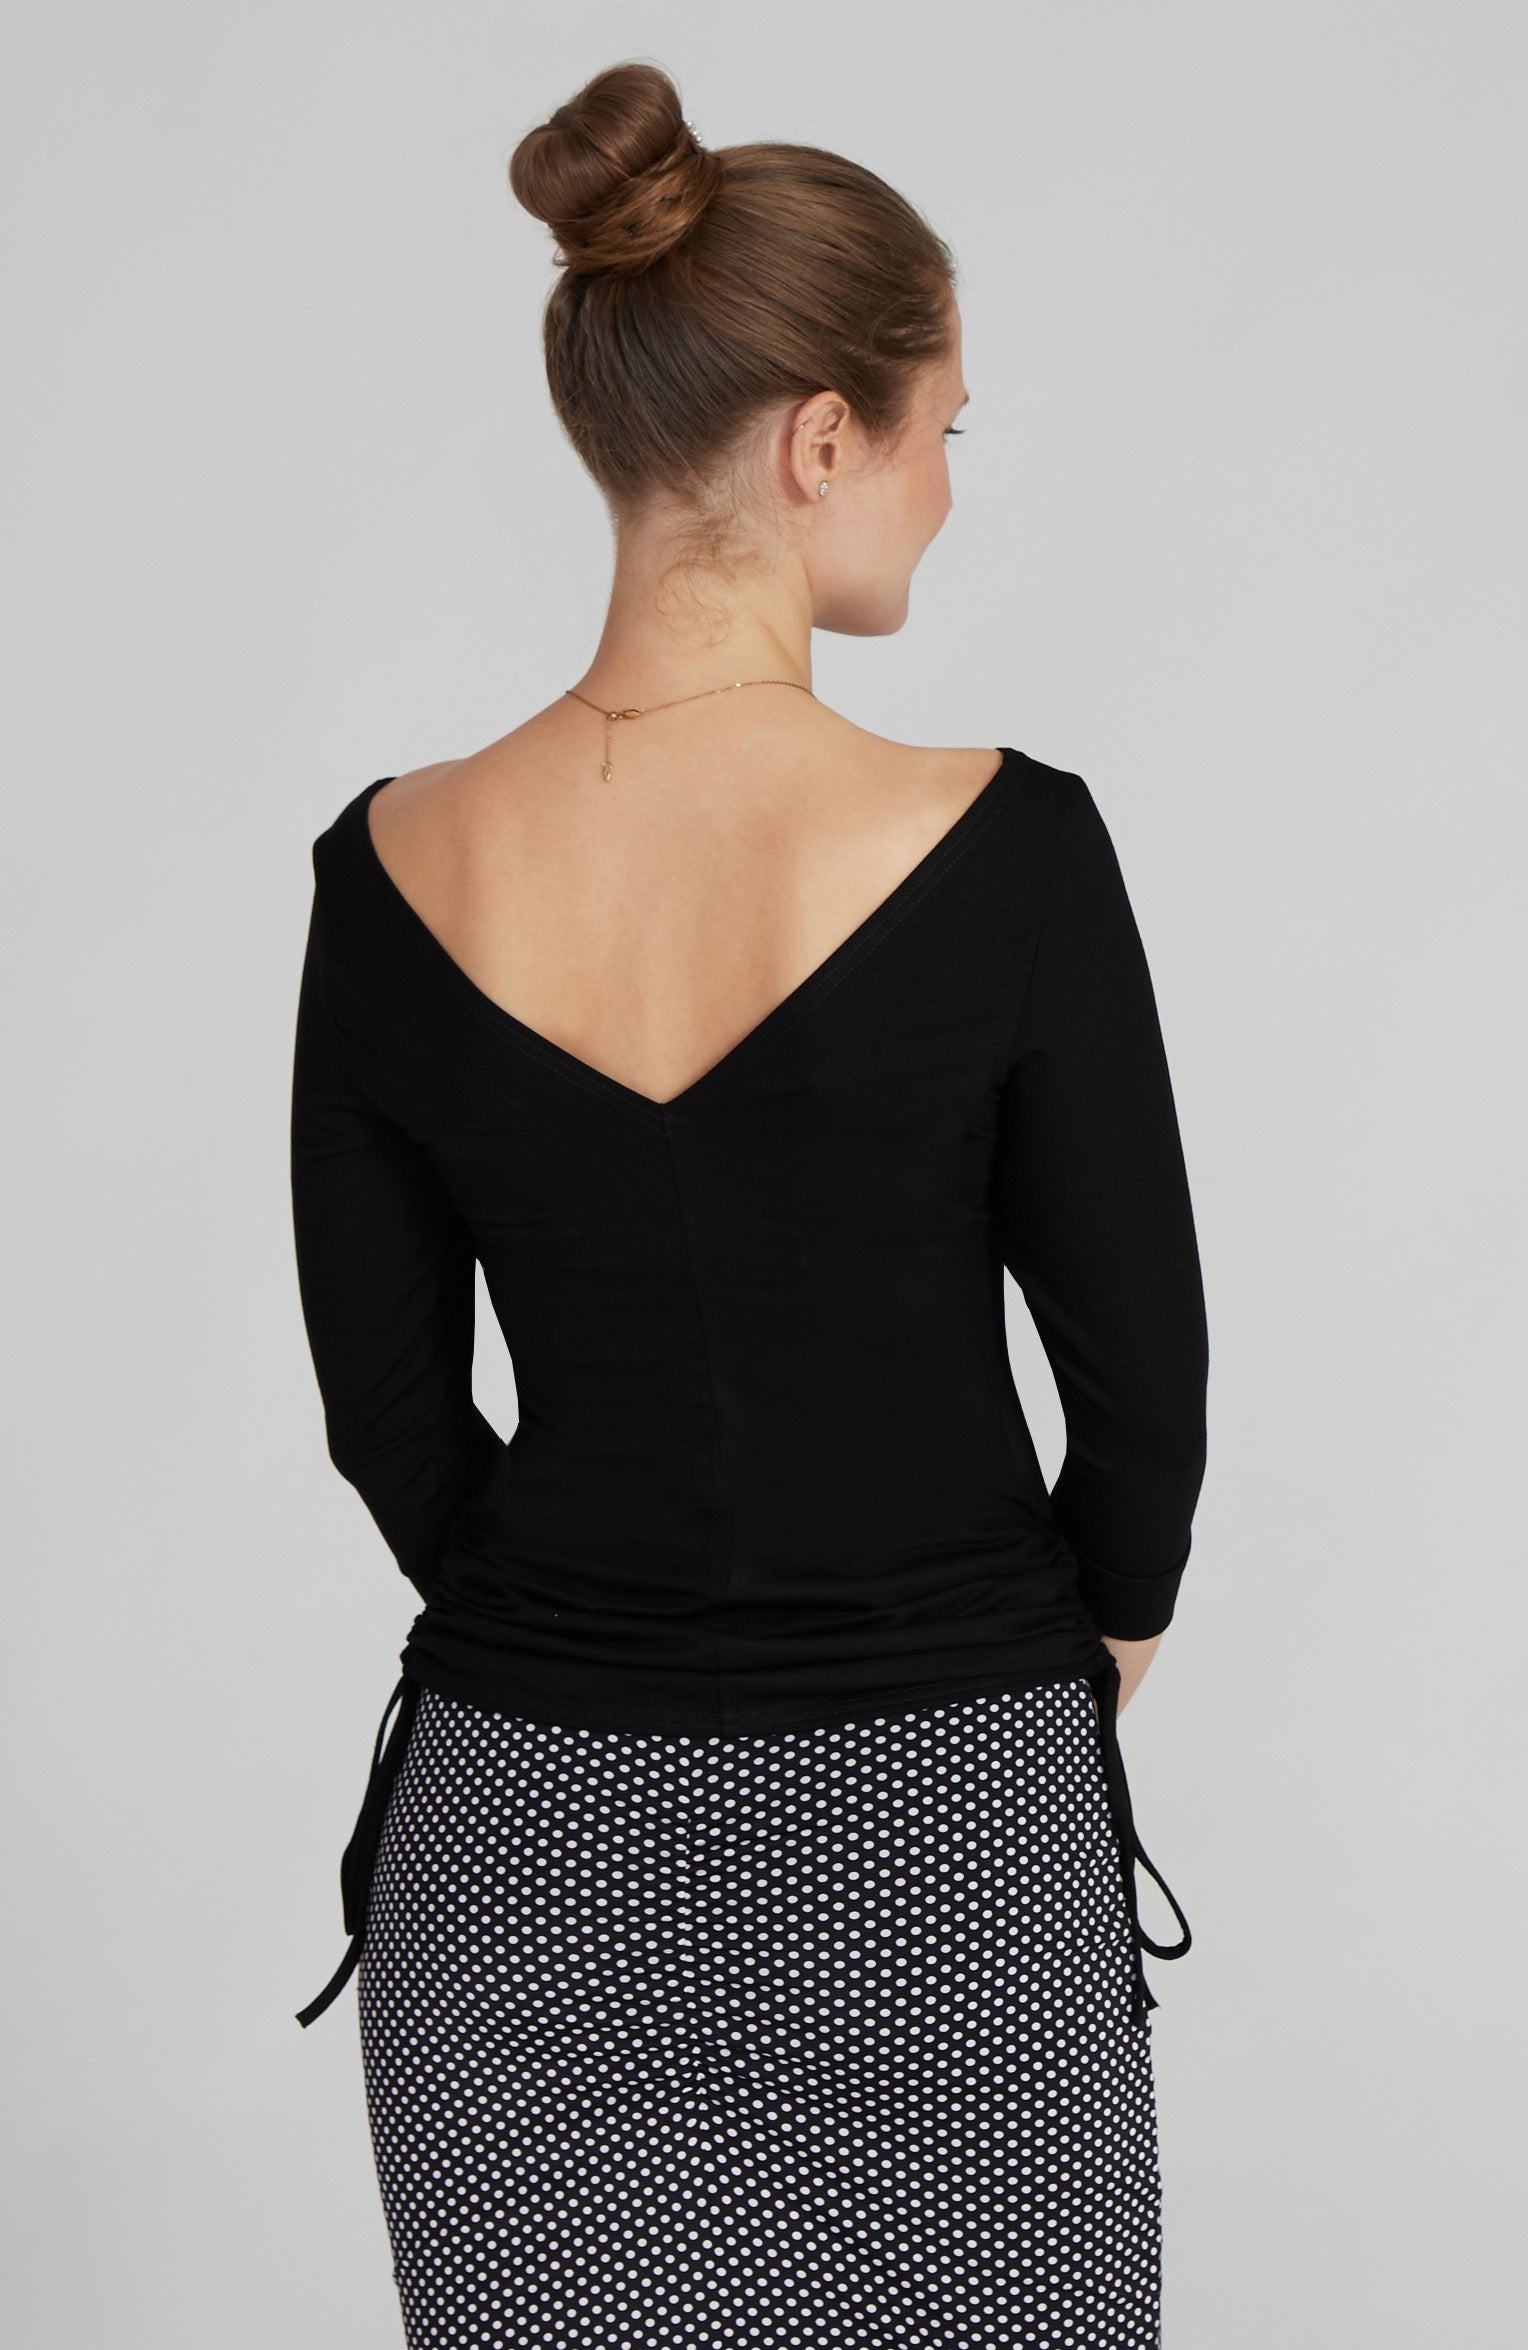 EMMA - Long Sleeve Top with Draped Sides in Black Bamboo Jersey